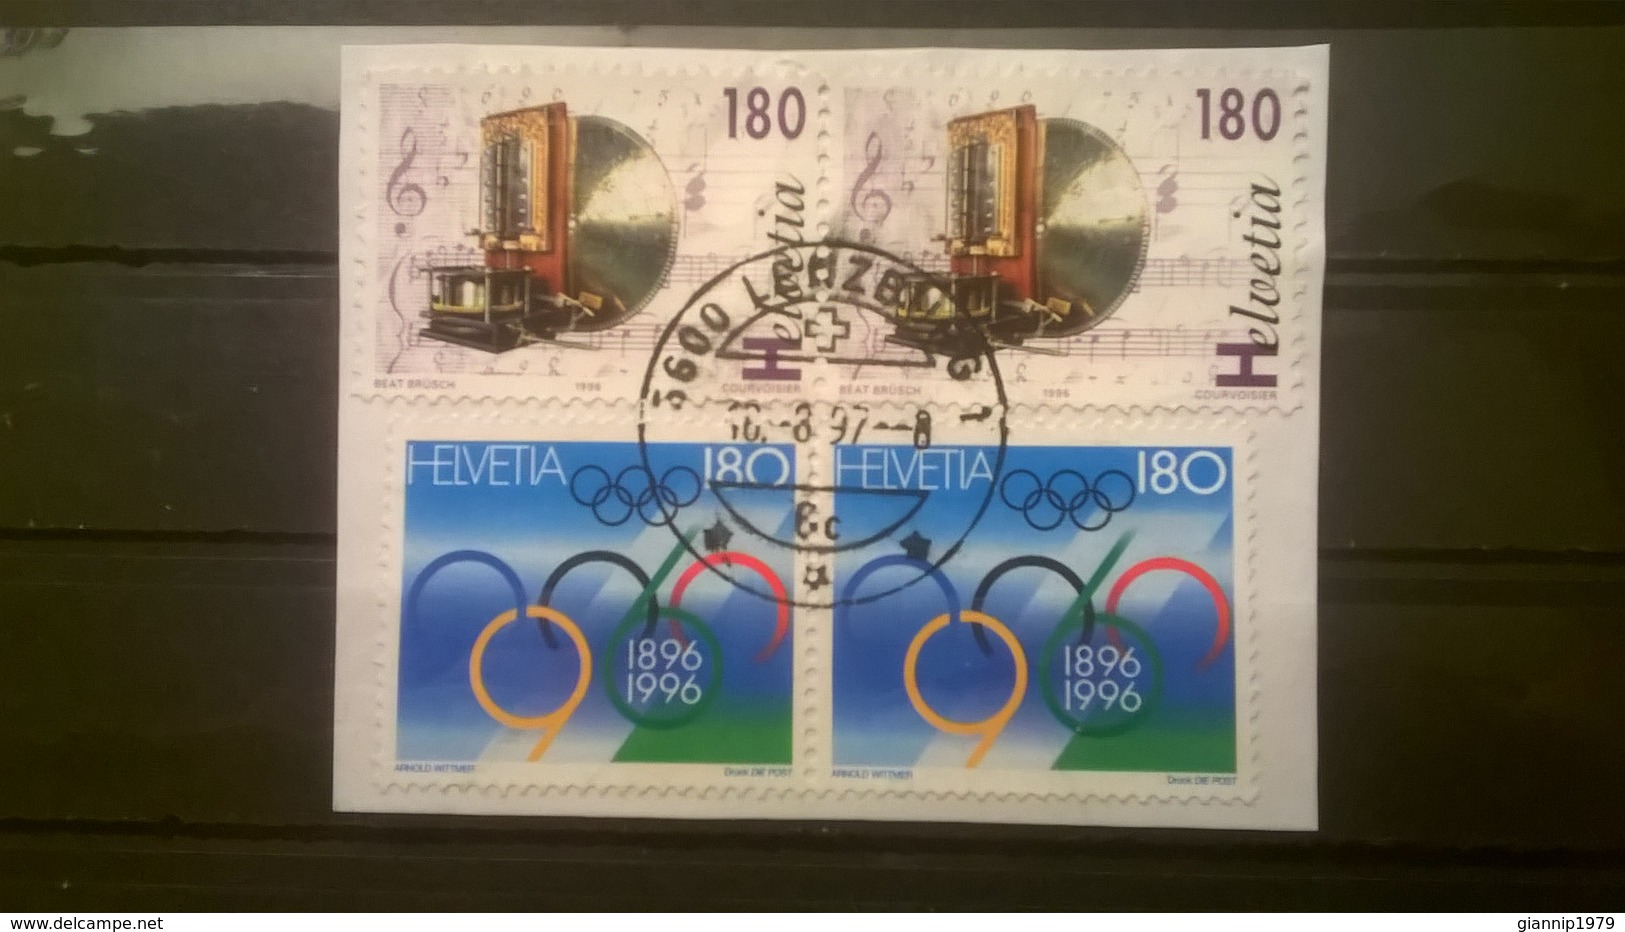 FRANCOBOLLI STAMPS SVIZZERA HELVETIA 1996 USED SU FRAMMENTO OLYMPIC GAMES MUSIC BOXES SUISSE - Usati